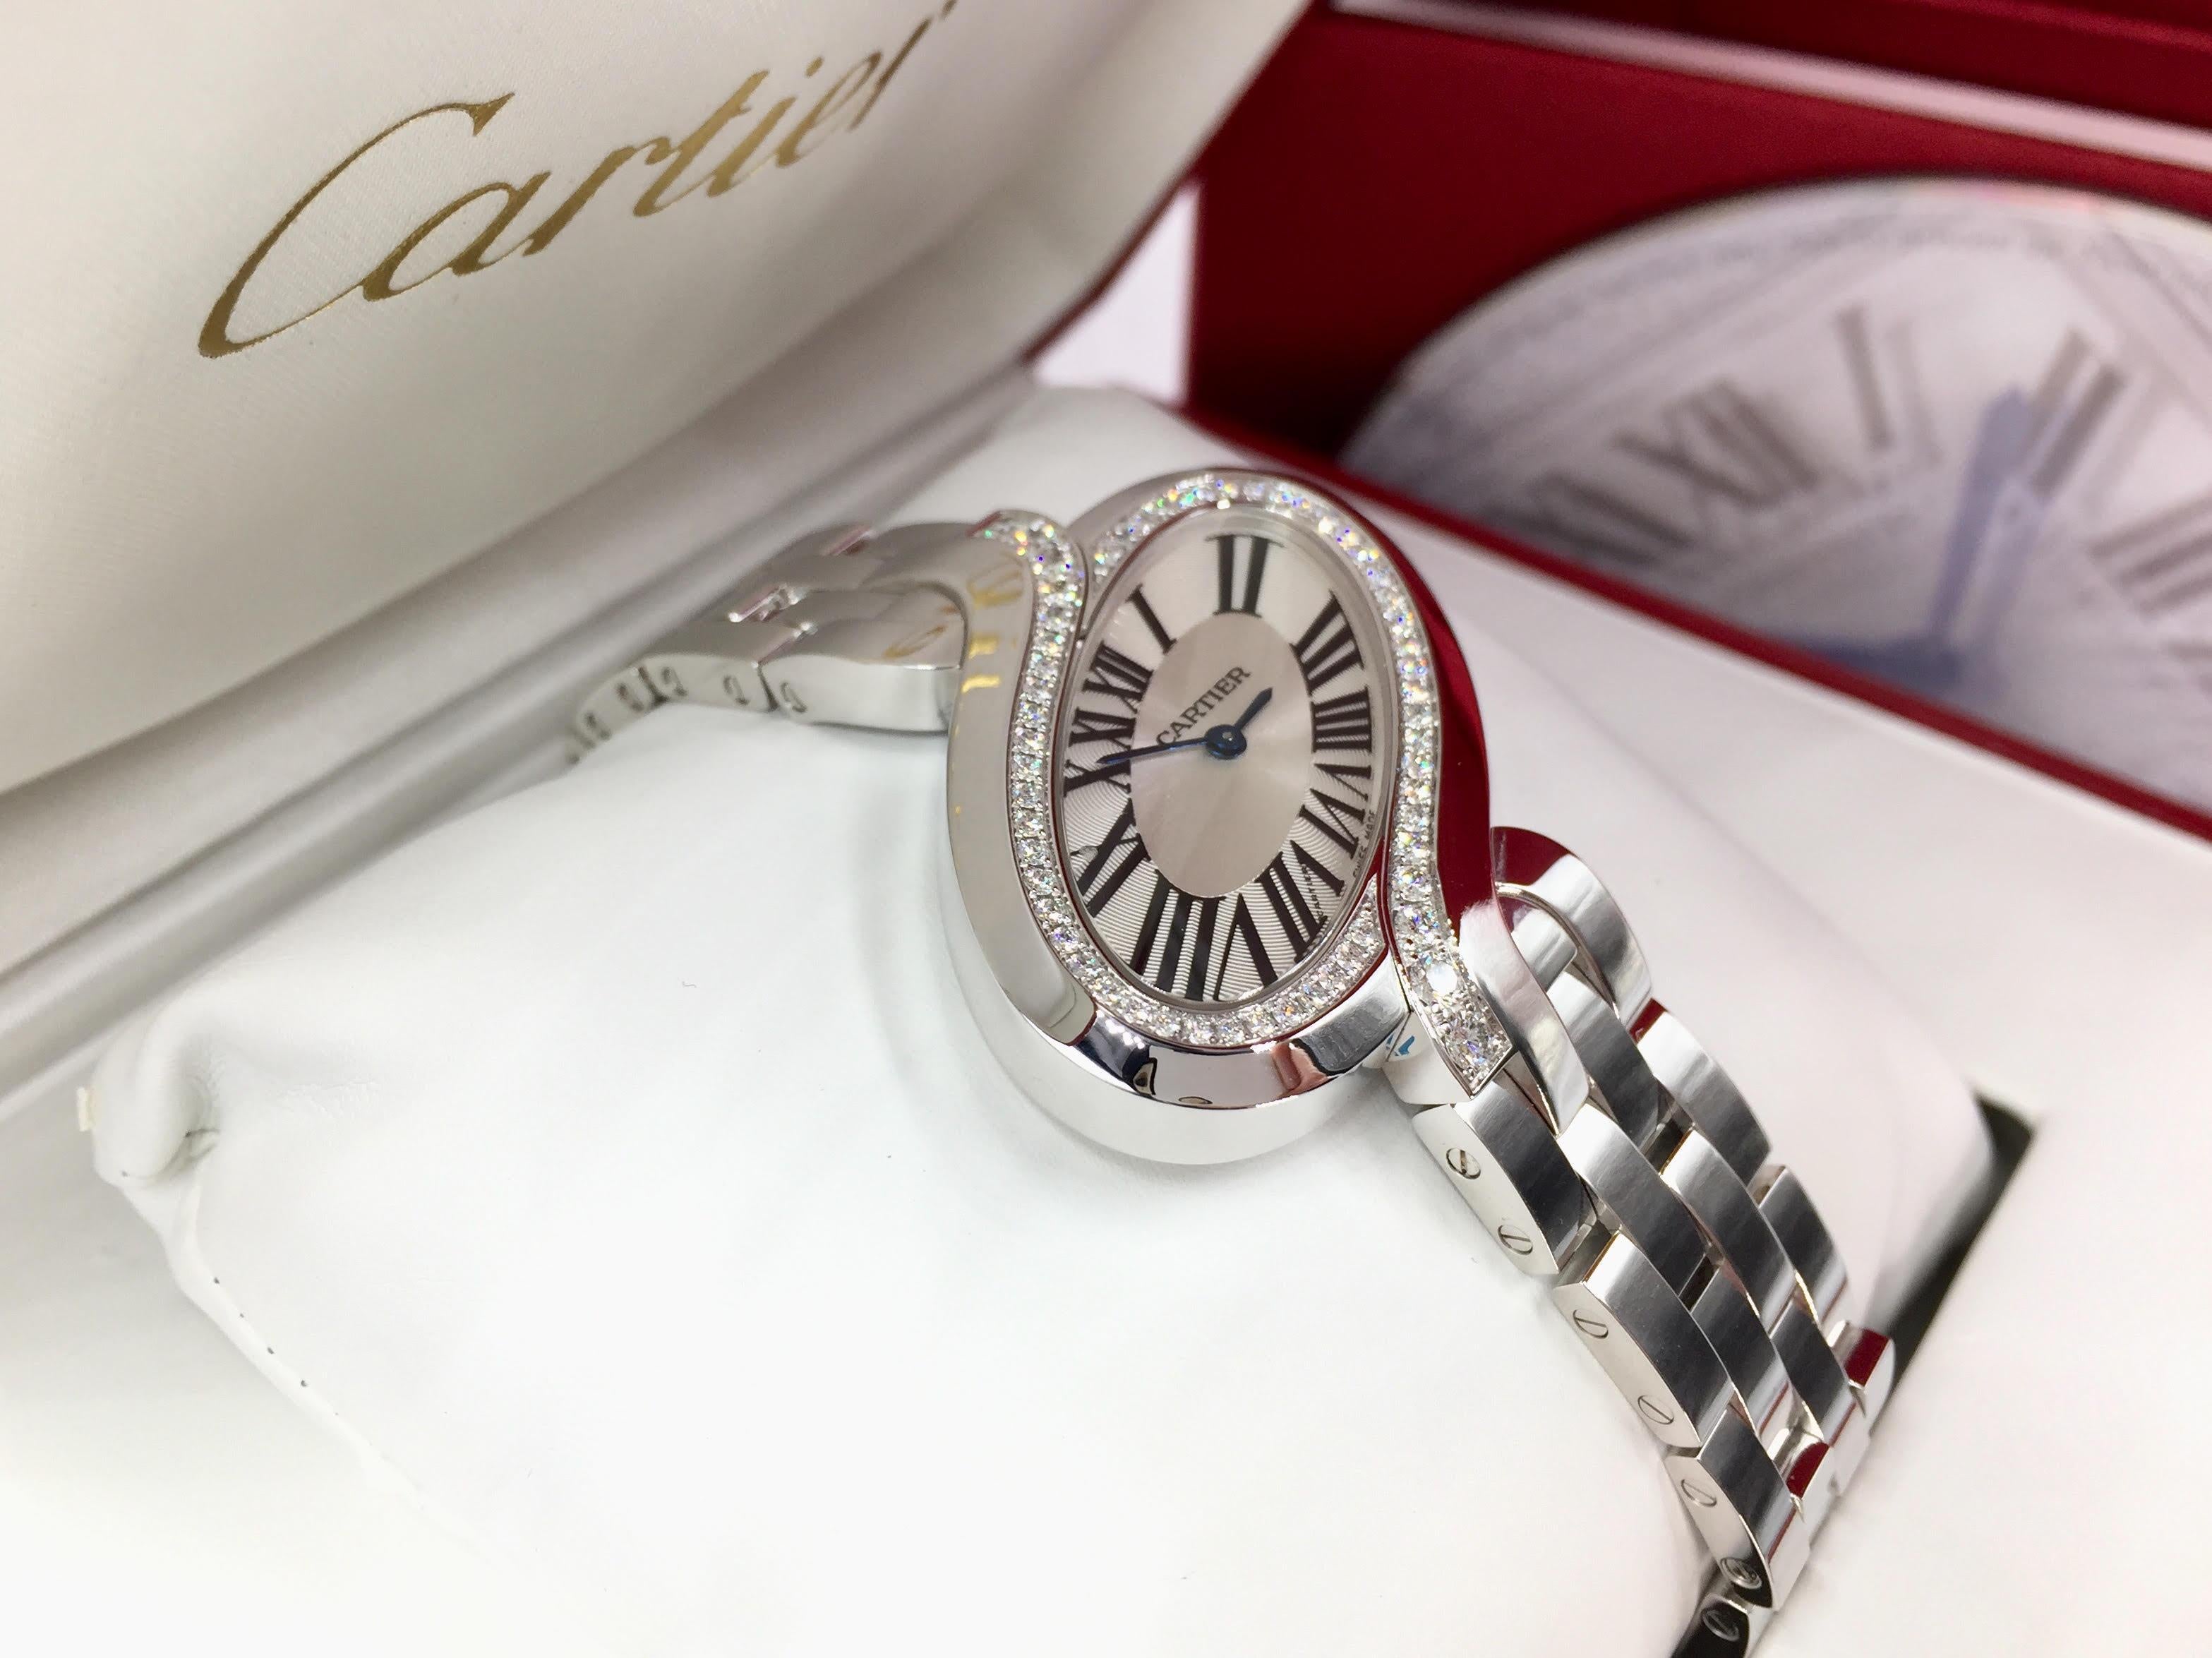 Cartier Delices Large Watch 18 Karat White Gold WG800007 For Sale 4